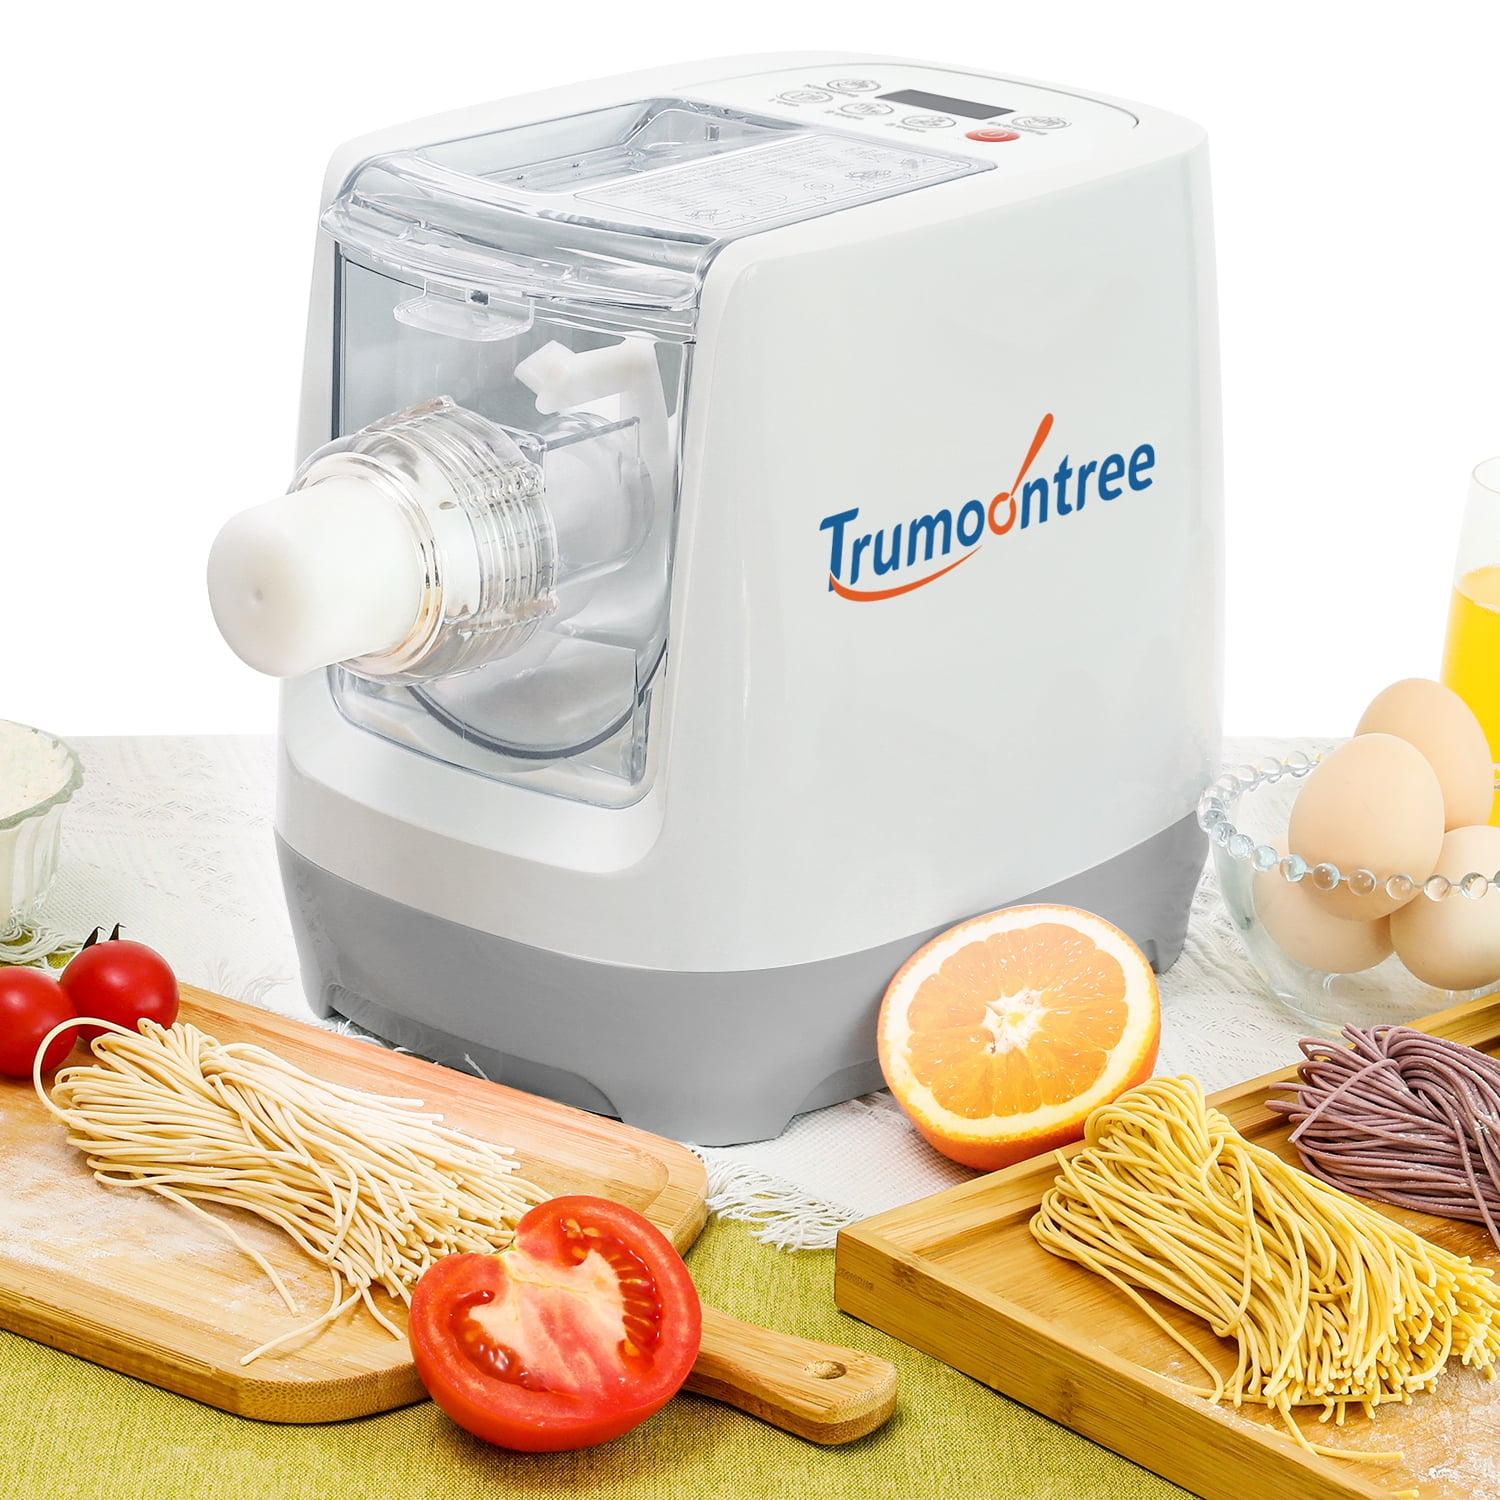 Electric Pasta Maker Machine, Automatic Pasta and Noodle Maker, Compact  Design Pasta Extruder Multi-Functional Spaghetti Macaroni Machine with12